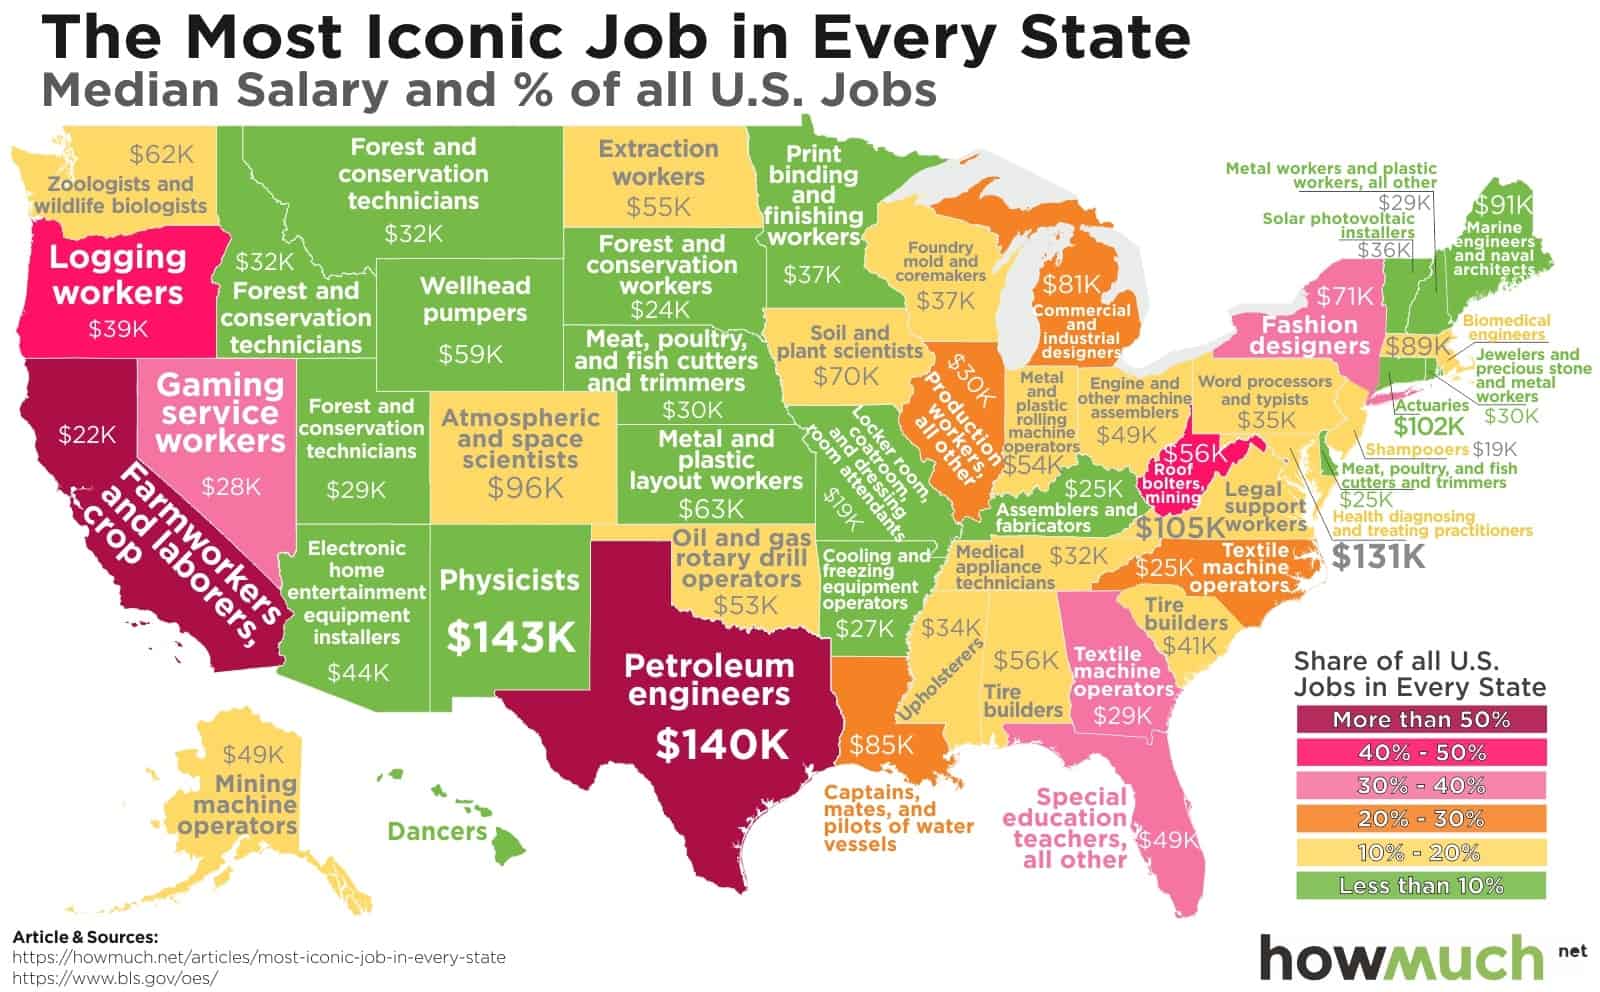 The Most Iconic Job in Every State